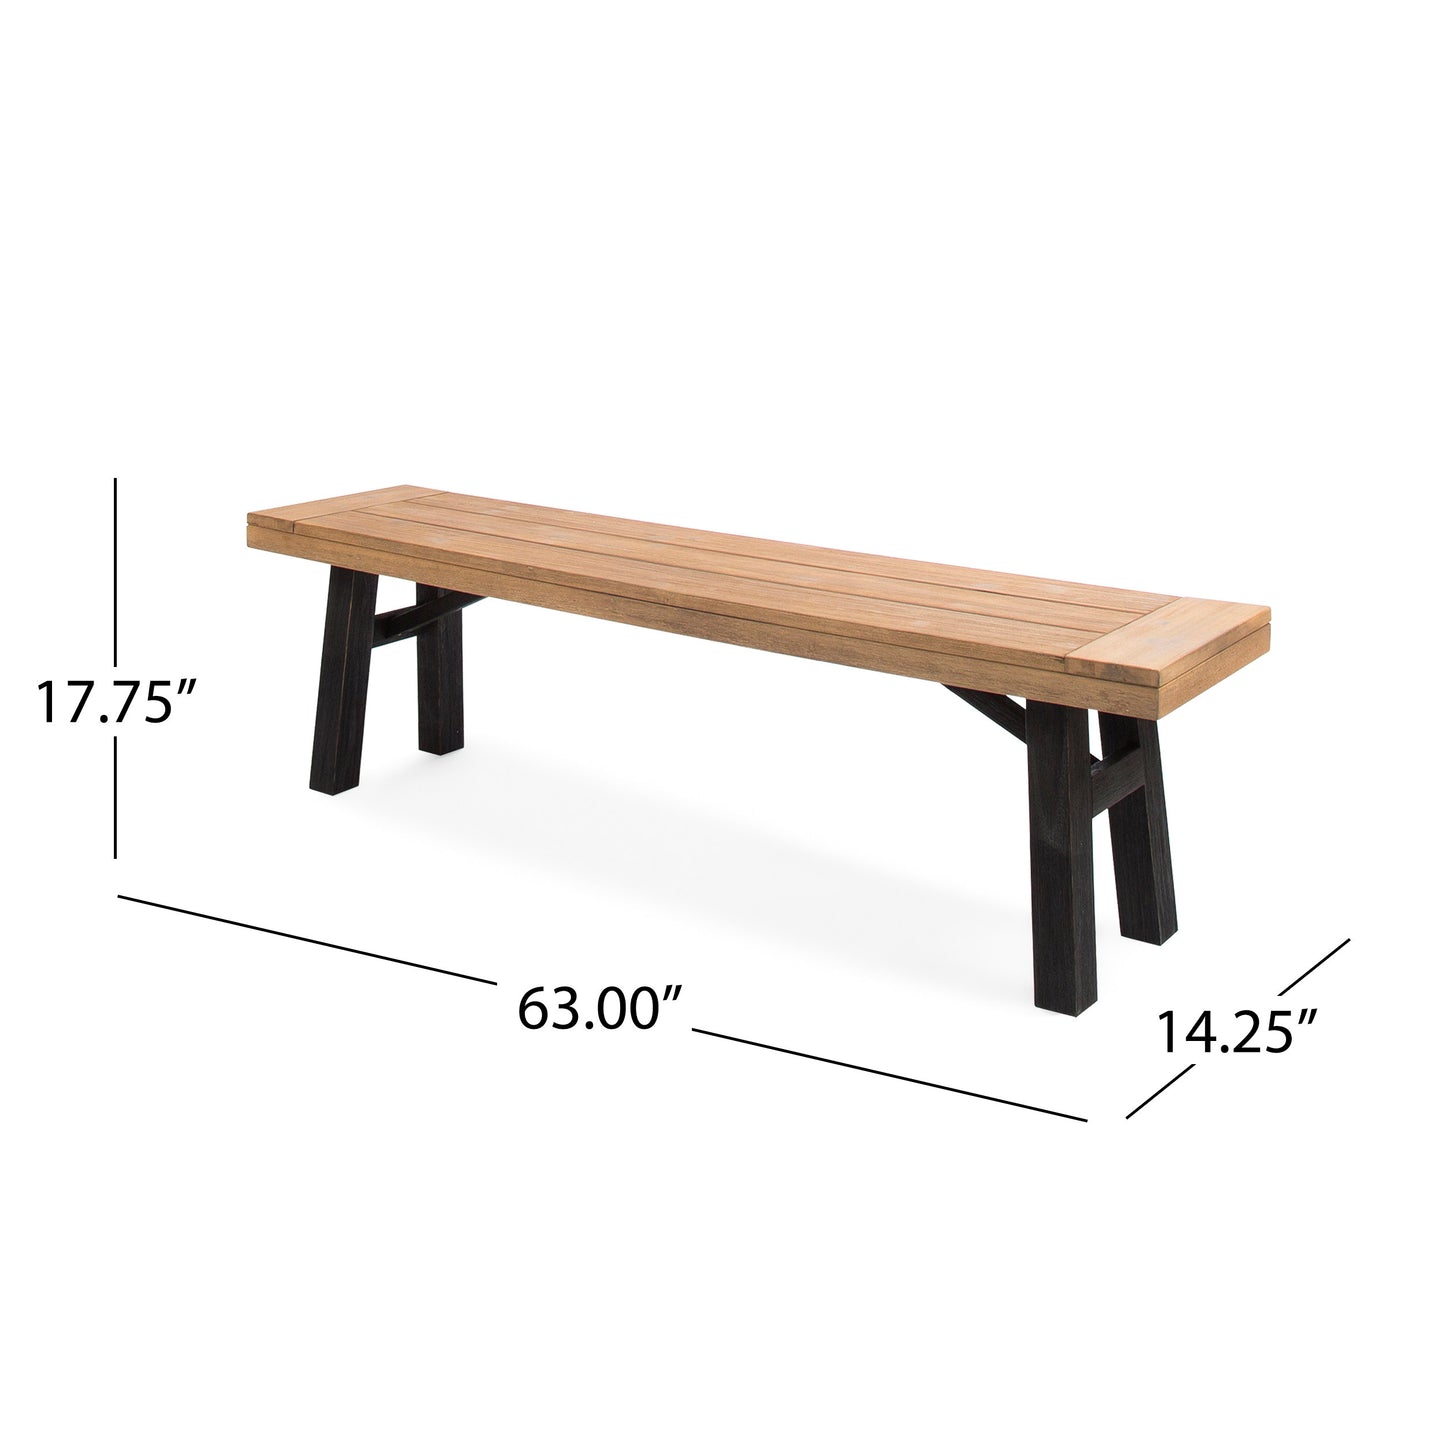 Betteravia Outdoor Acacia Wood Dining Benches, Set of 2